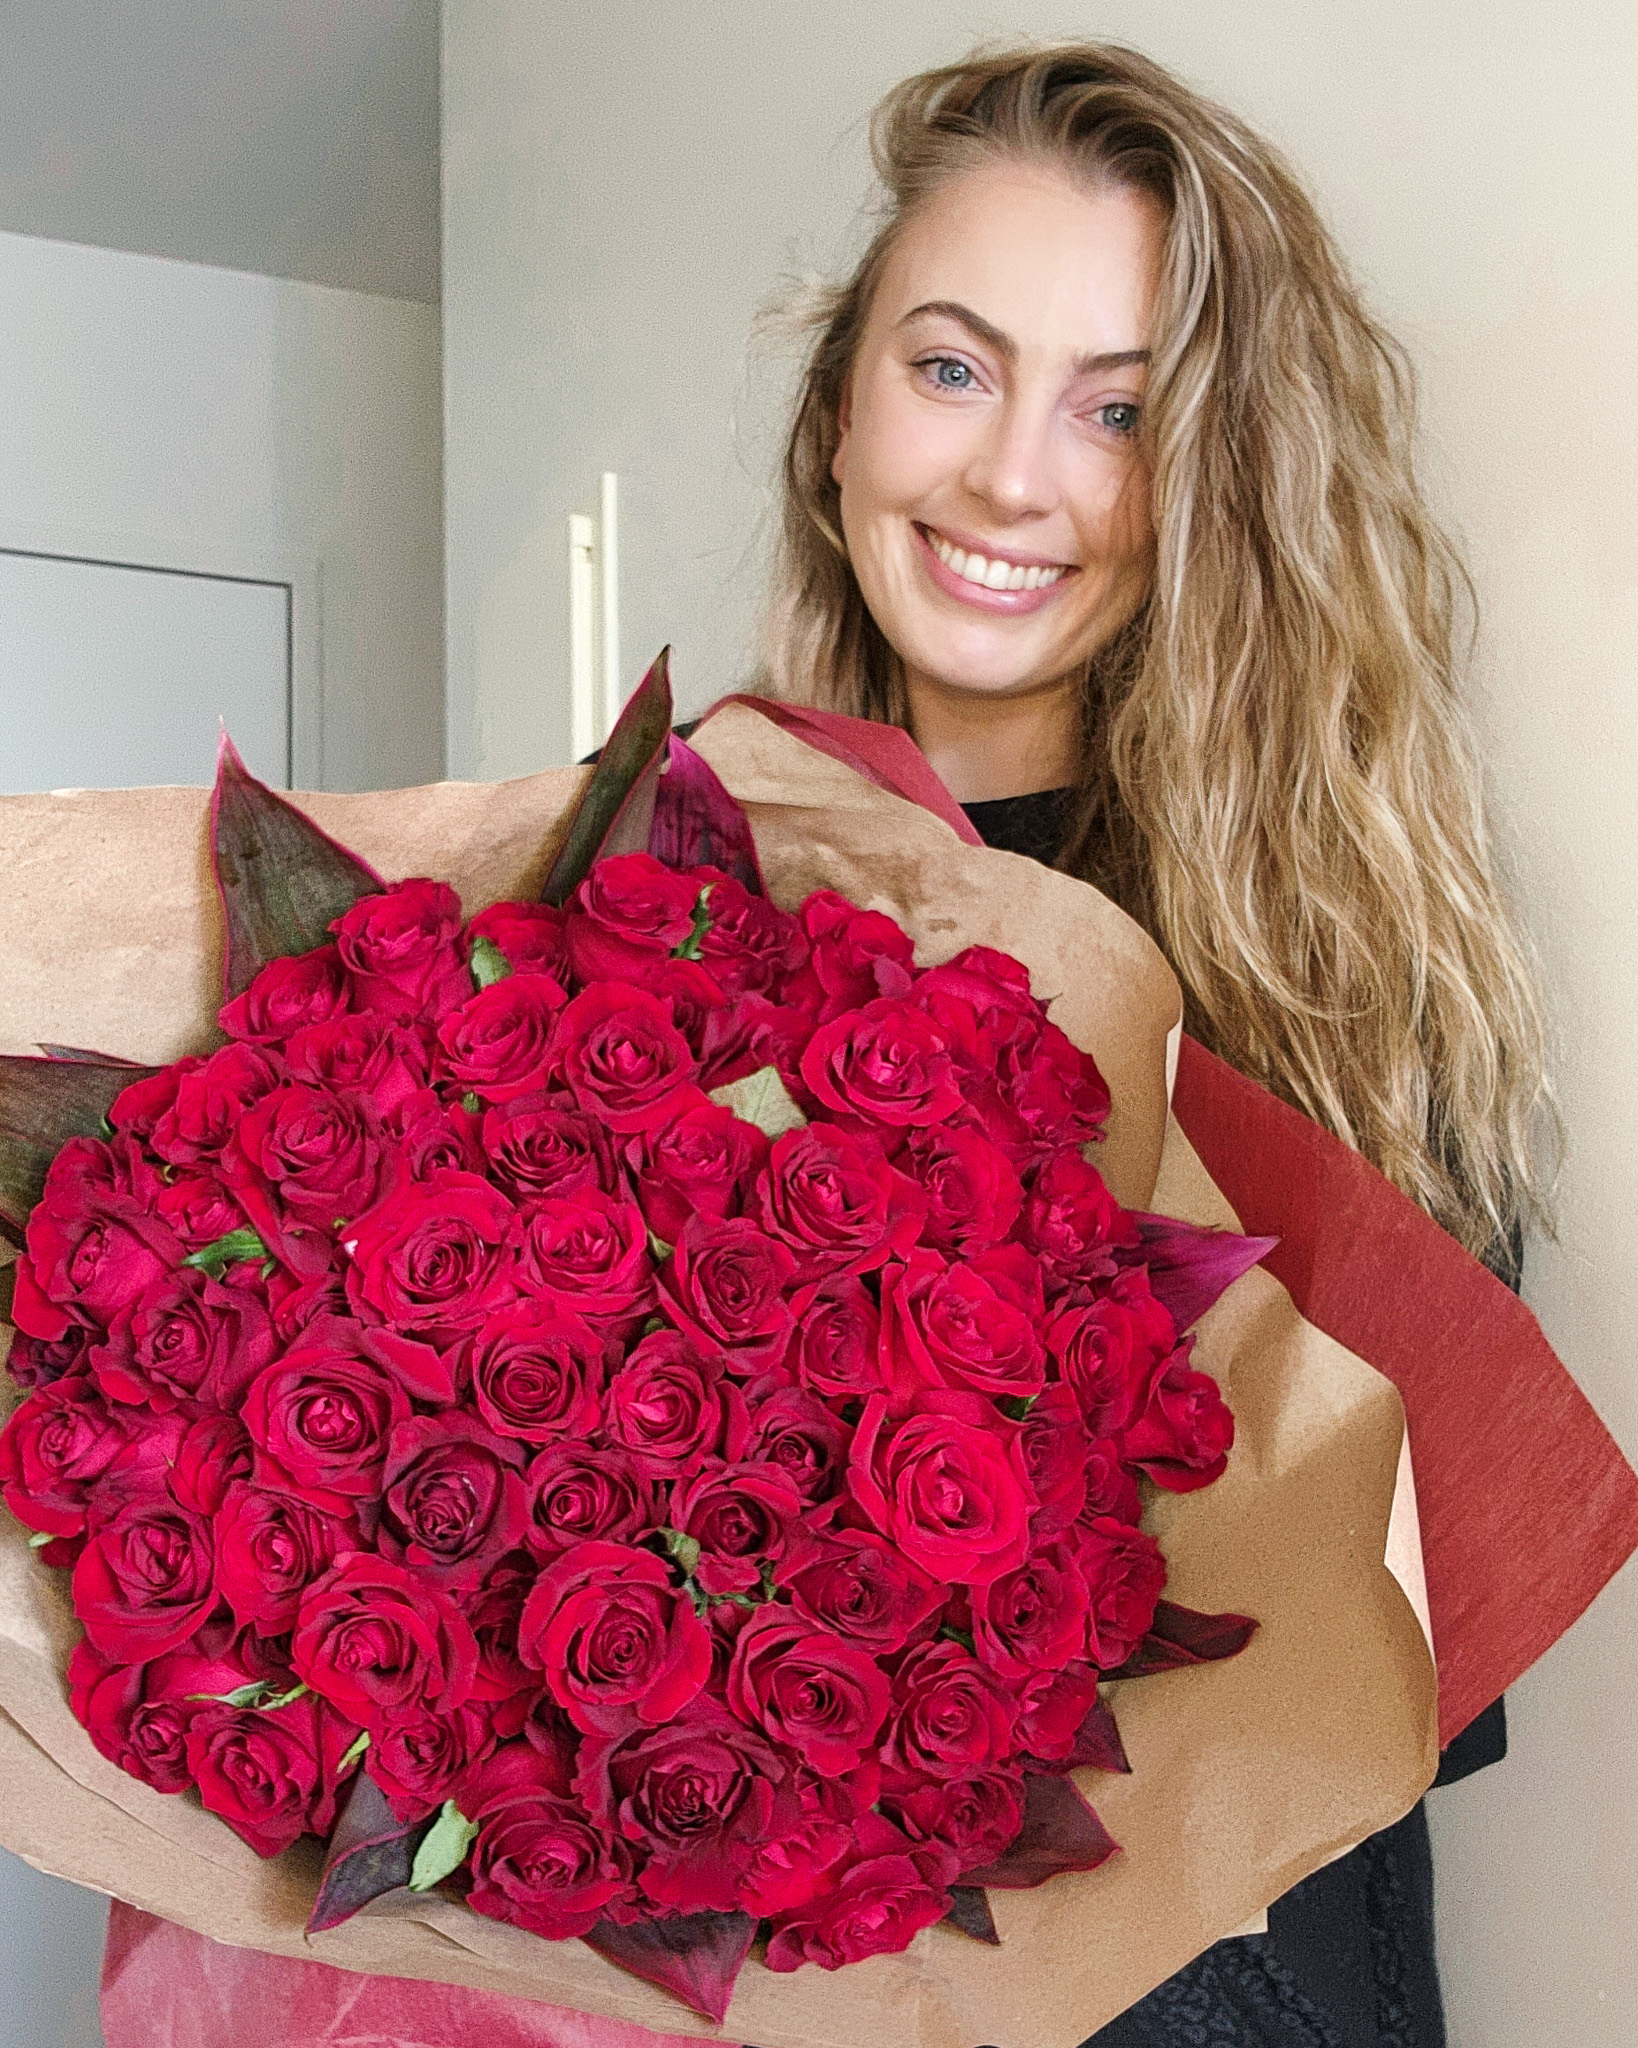 Big bunch of red roses with beautiful woman Valentine's Day gift